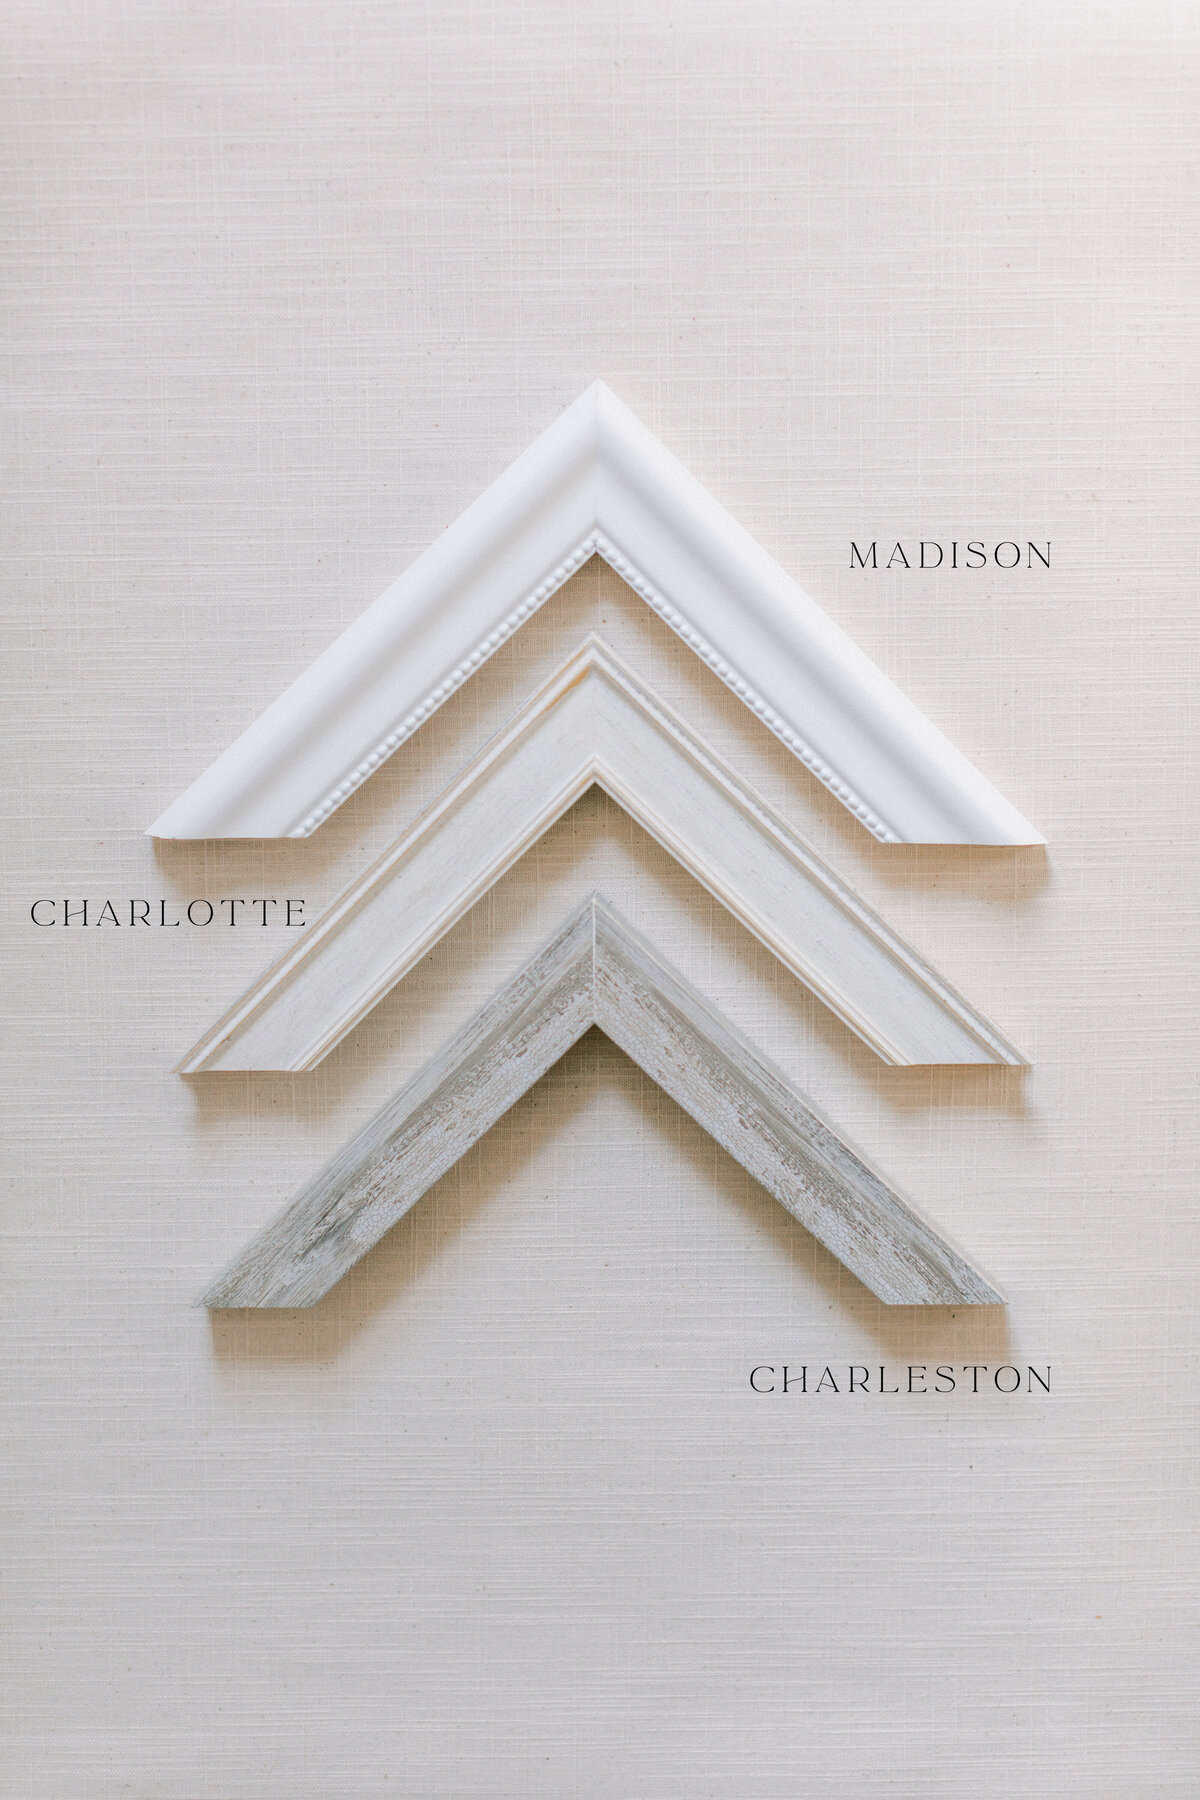 Three frame corners in white, ivory, and washed wood